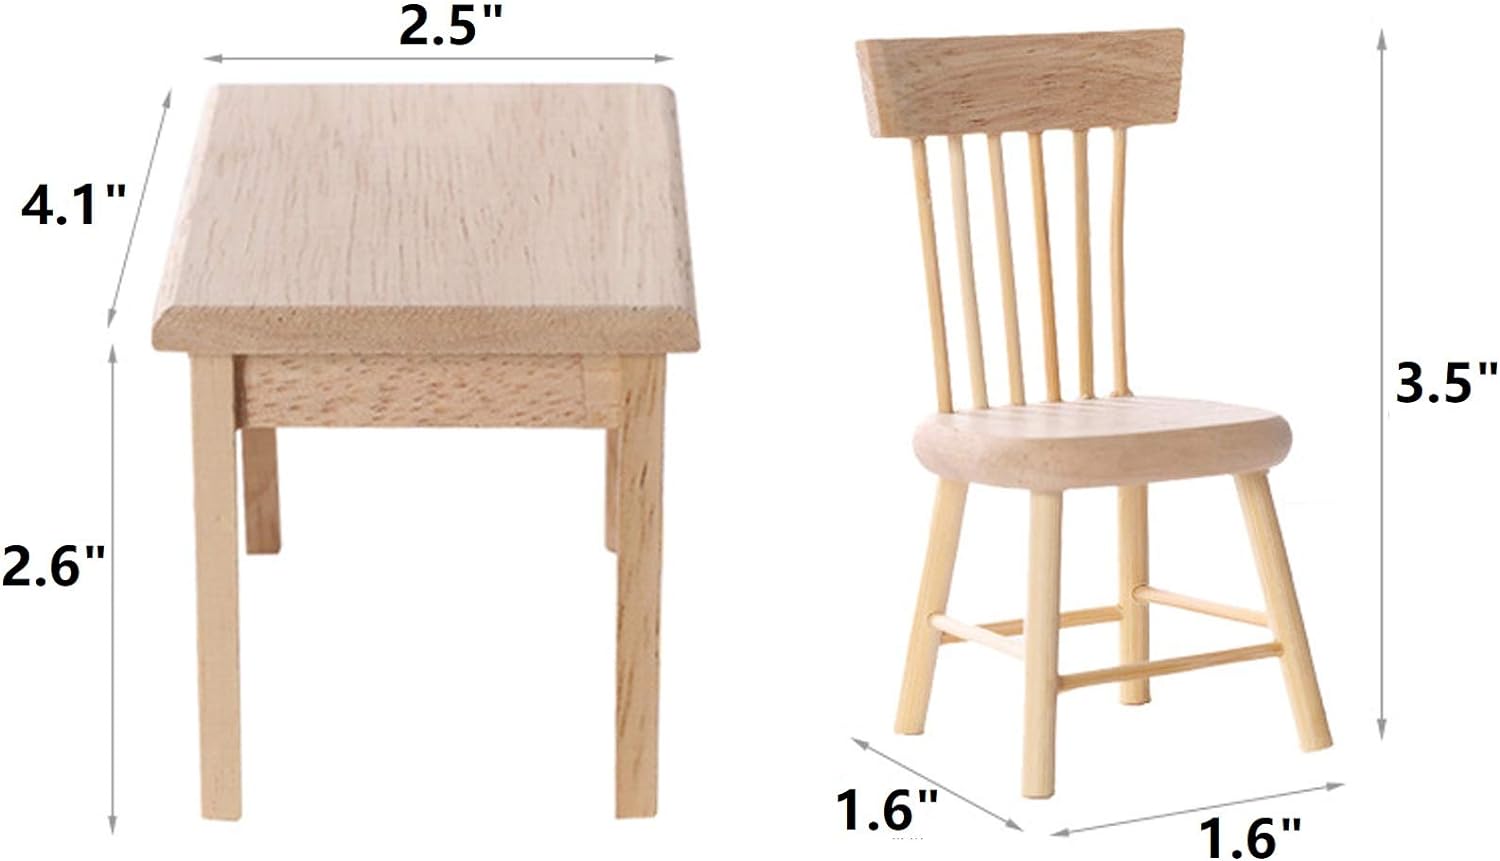 Z MAYABBO Wooden Dollhouse Furniture of Table & Chair Miniature Dollhouse Accessories of Dining Room Accessory 1/12 Scale